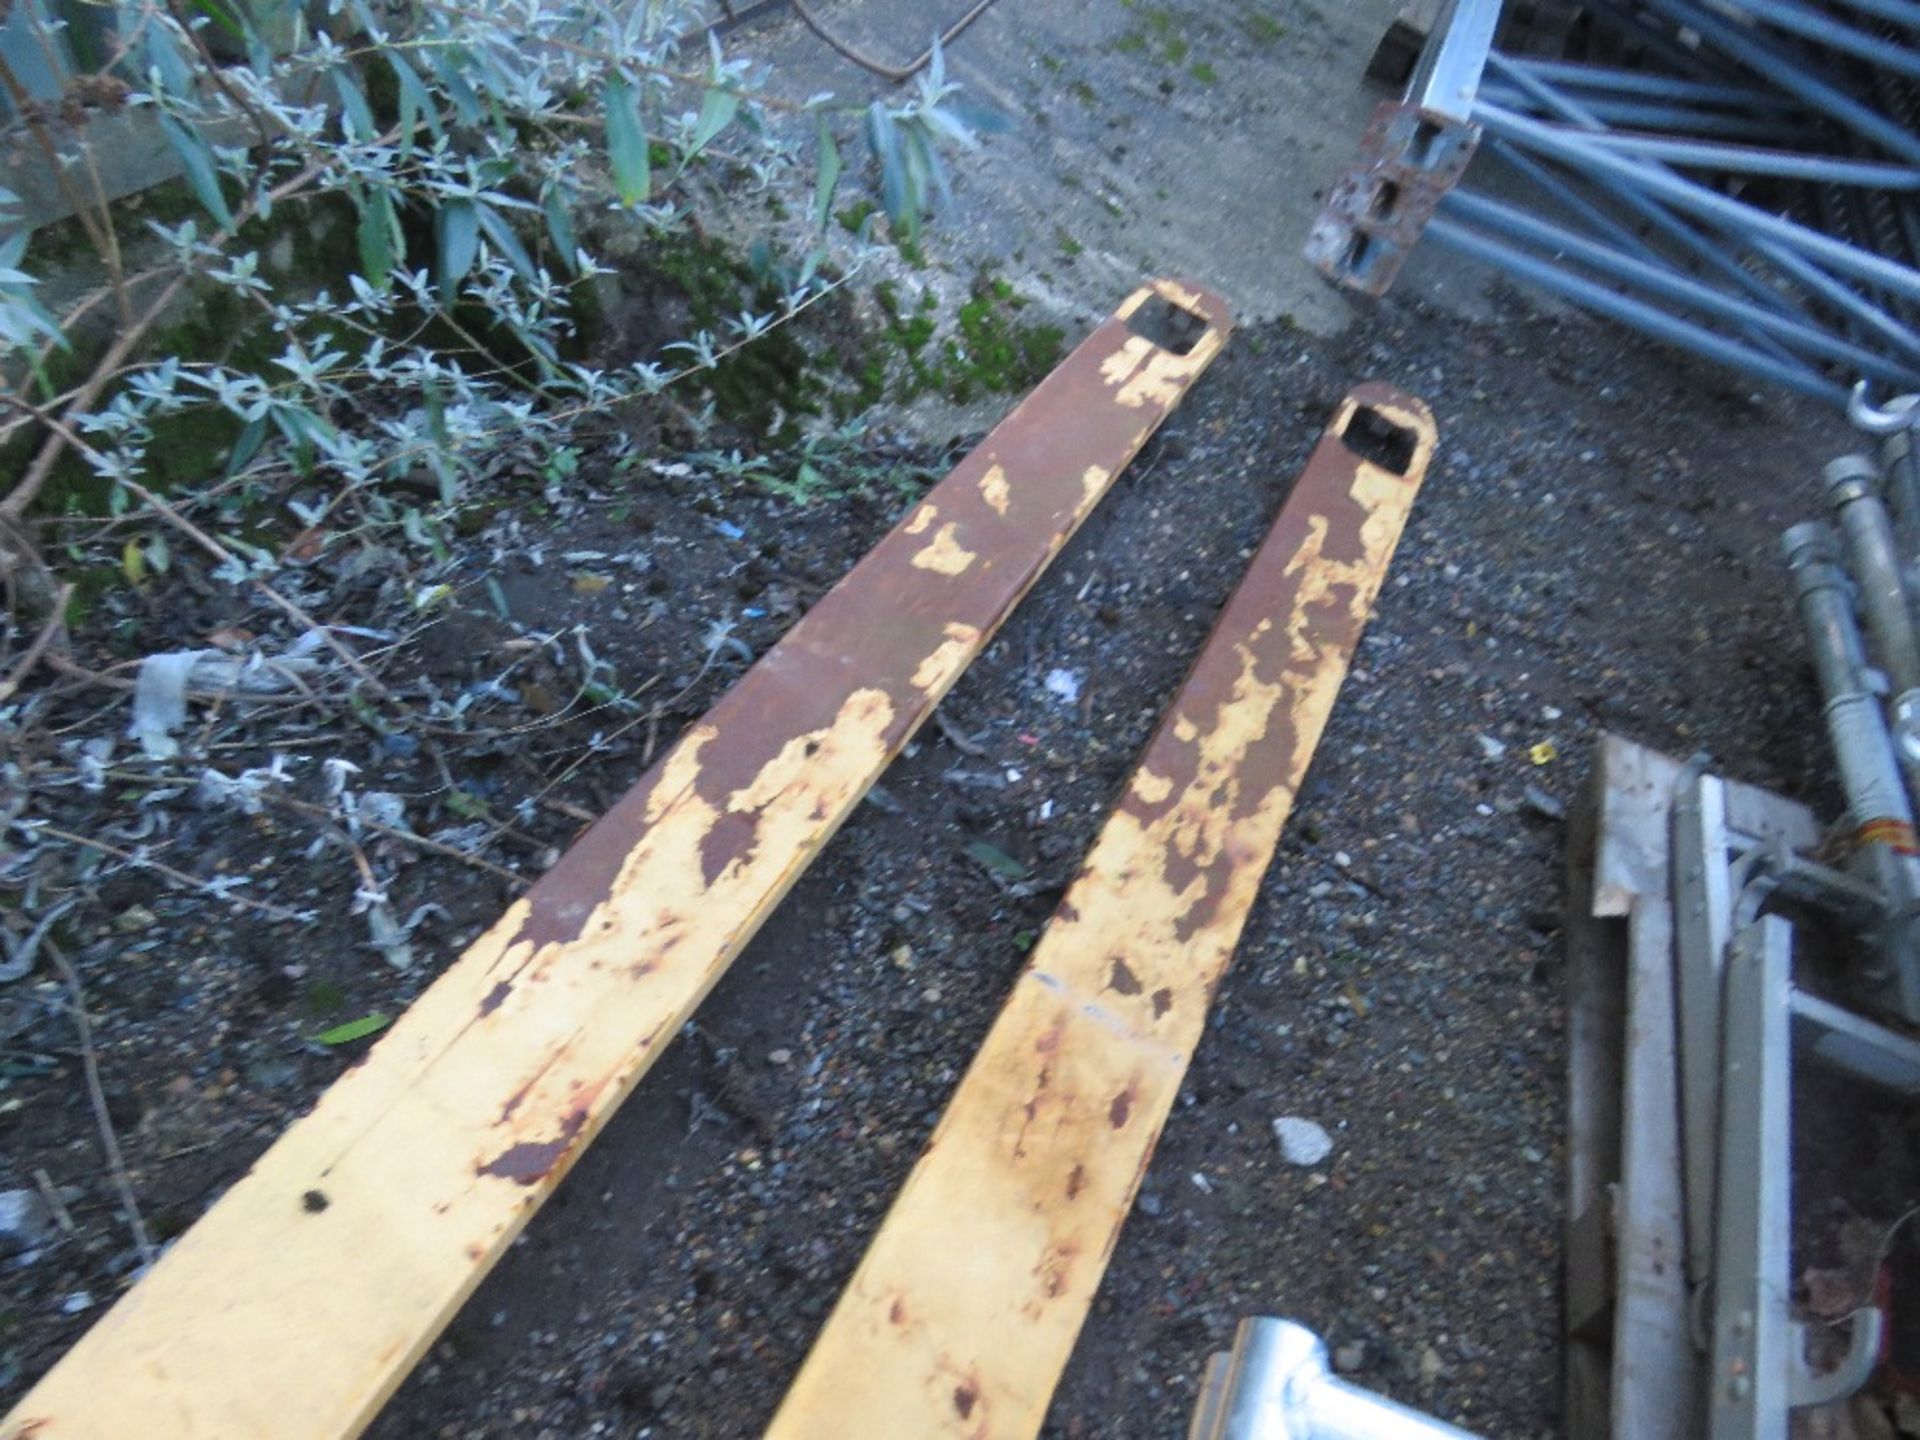 LONG BLADED PALLET TRUCK FOR BOARDS ETC WHEEL MISSING ON FRONT. - Image 3 of 3